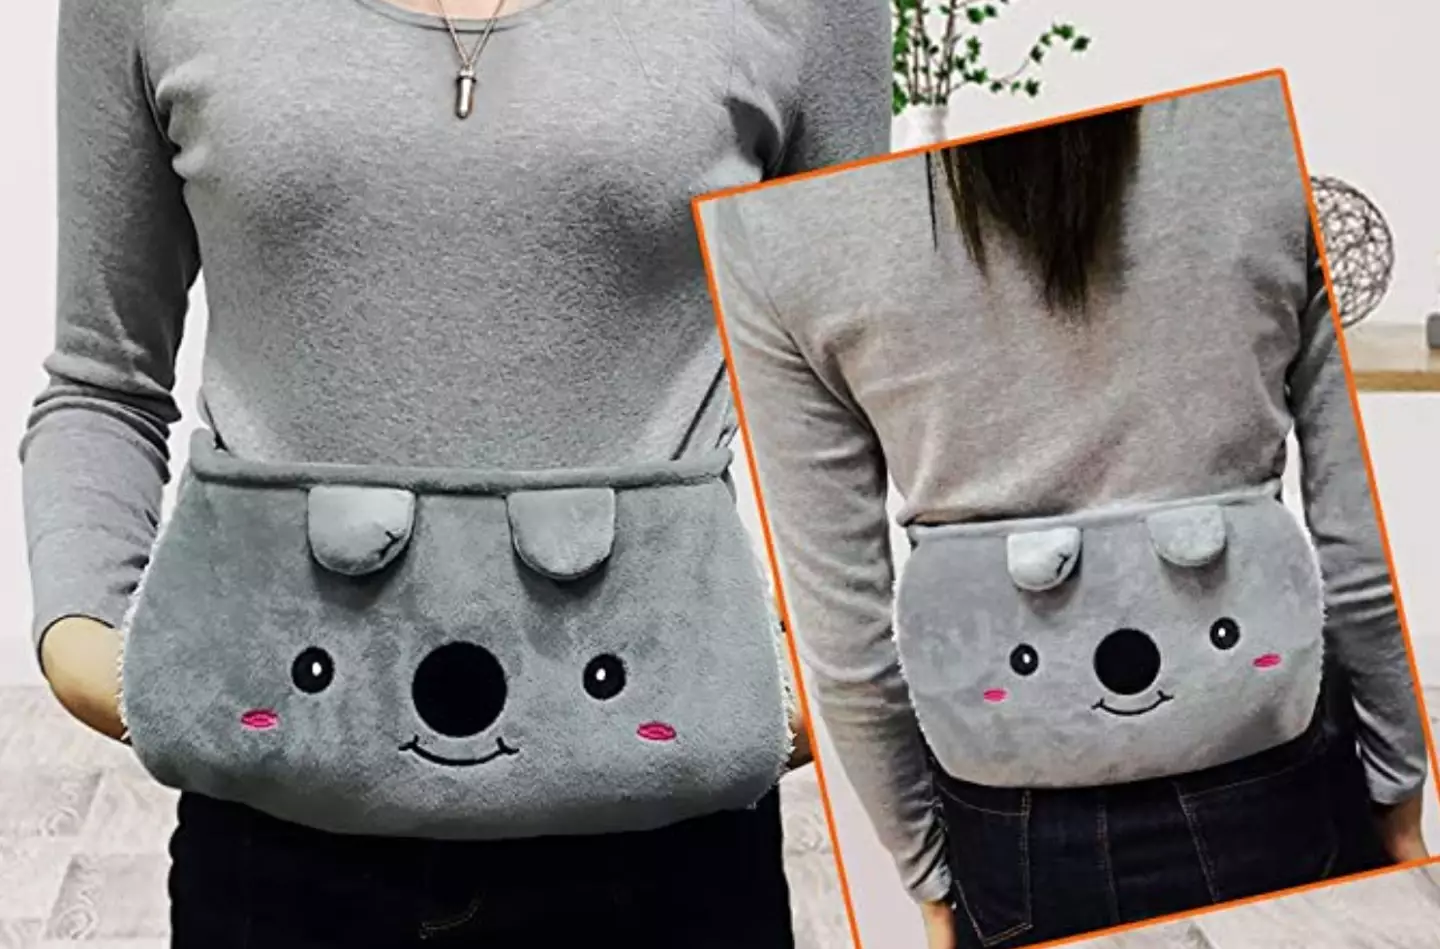 Women on TikTok are obsessed with the hot water bottle pouch (